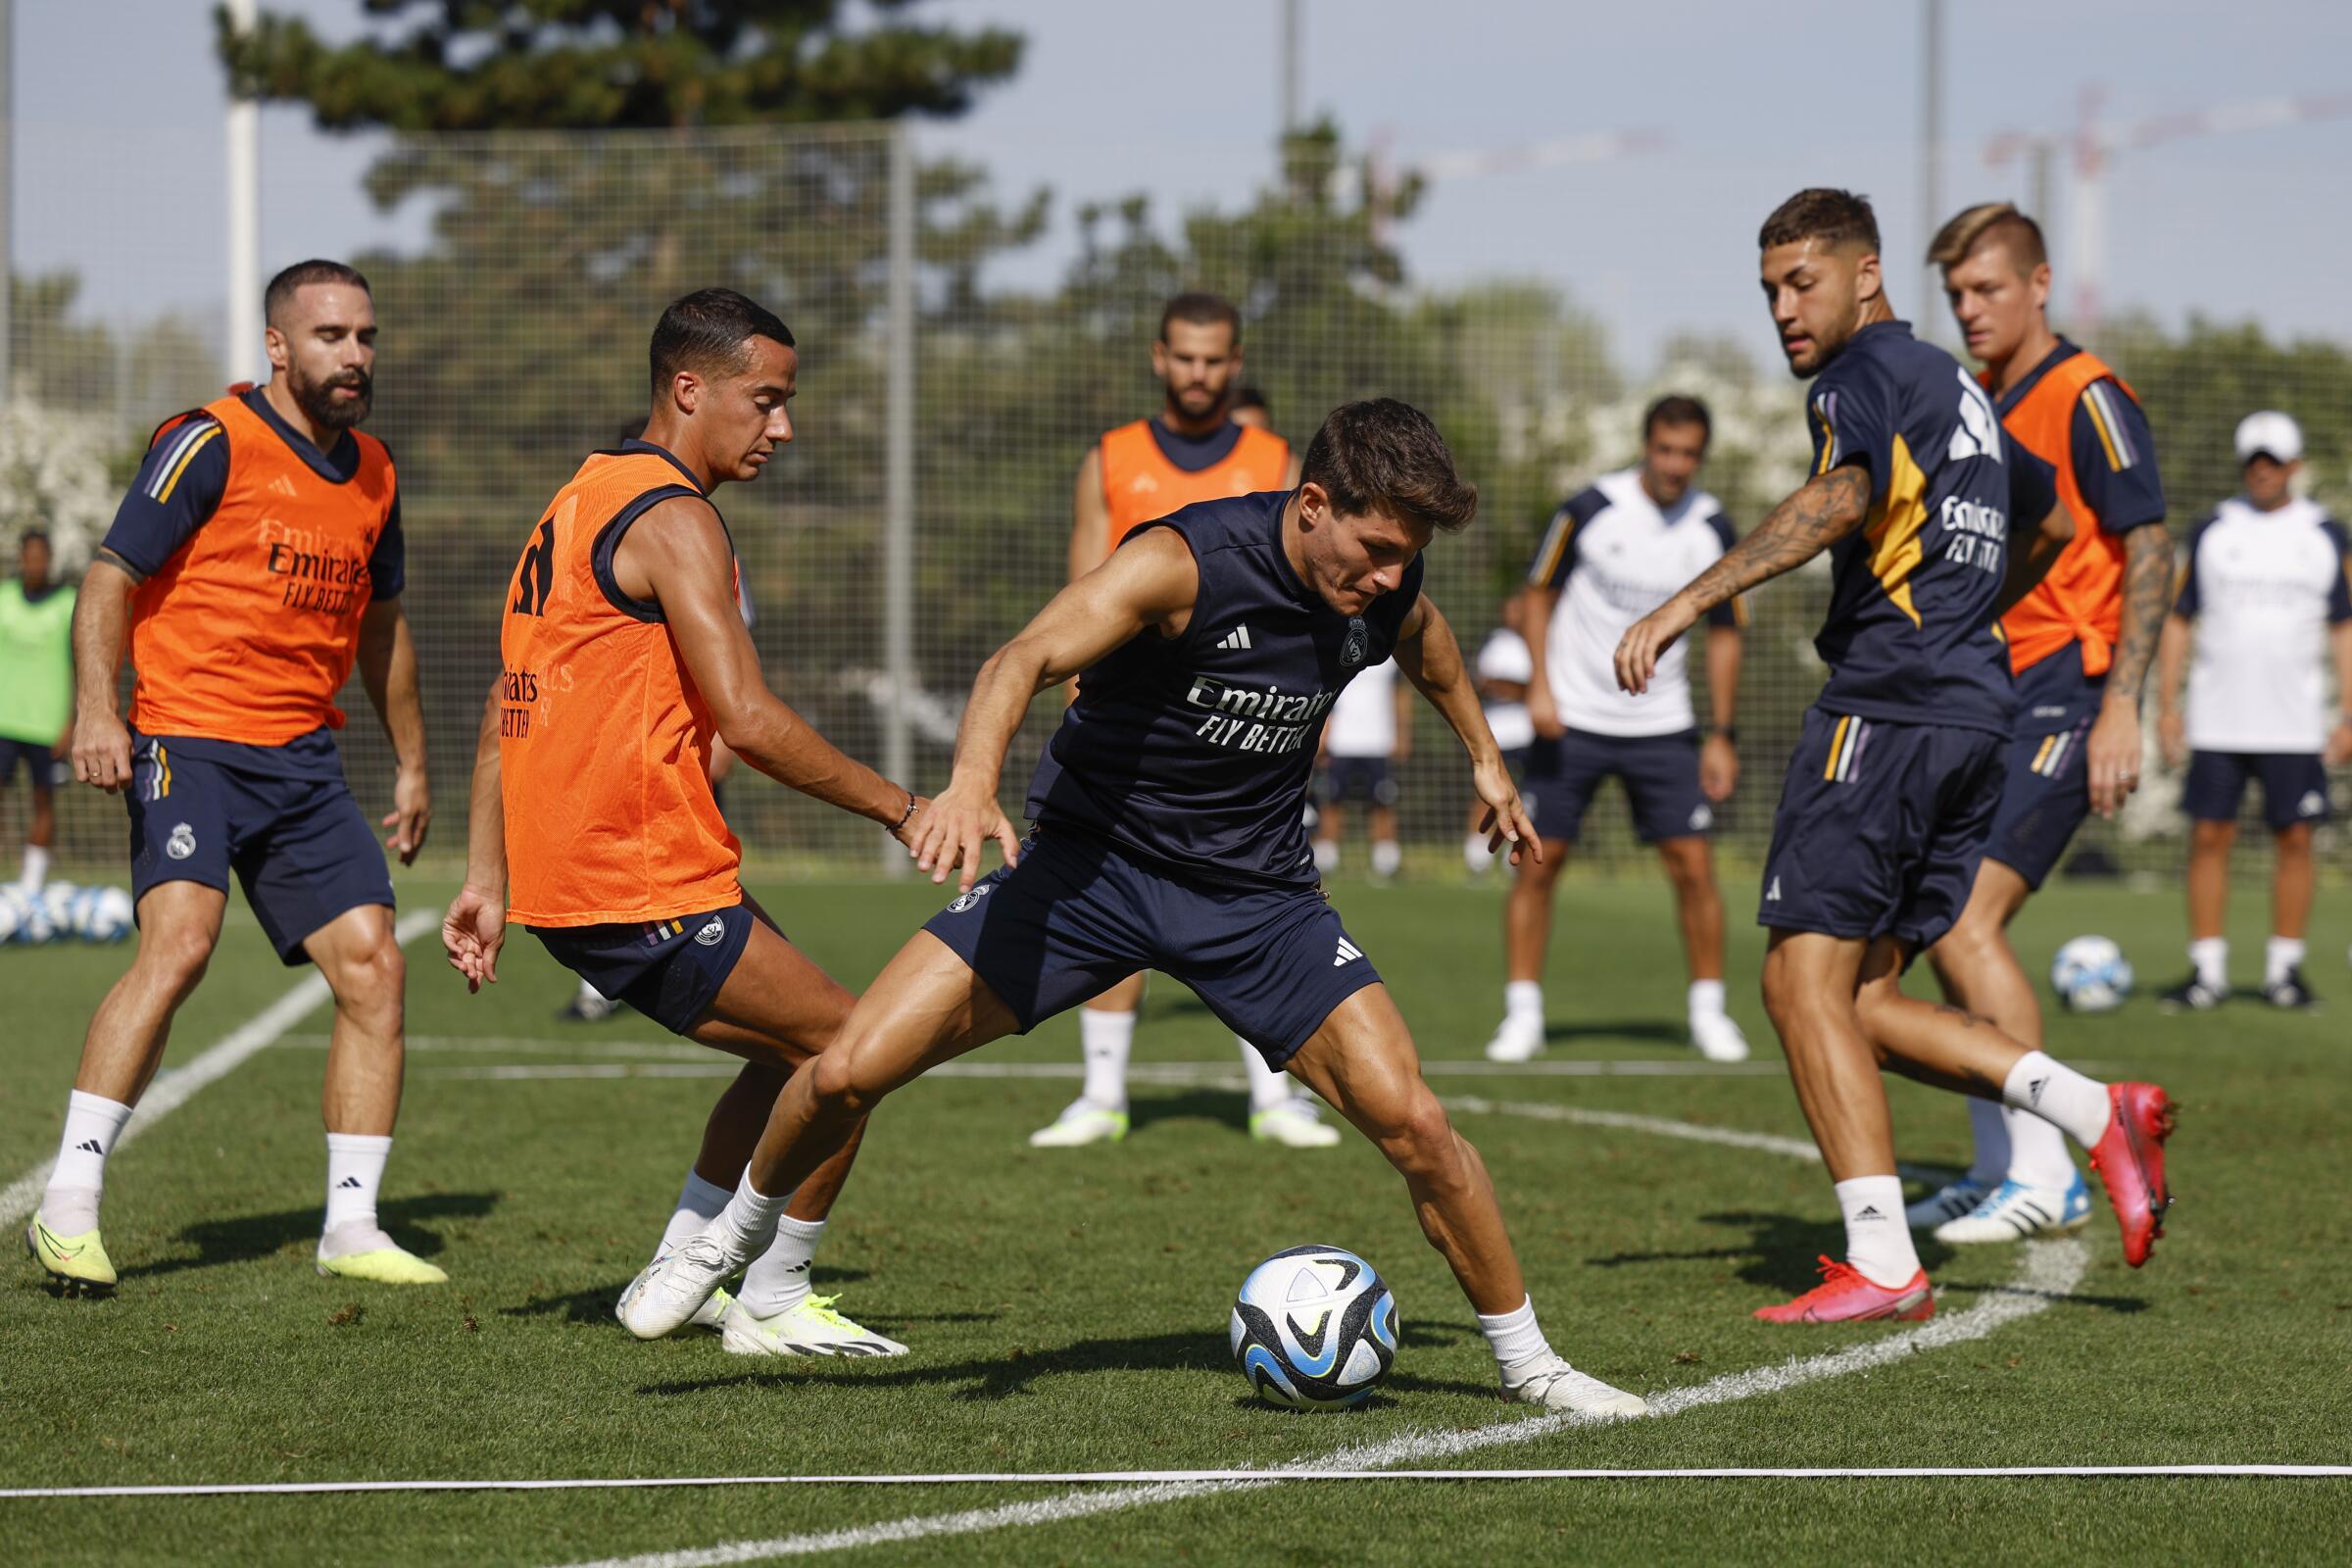 Real Madrid left back Fran García controls the ball during a recent training session with his teammates in Spain.